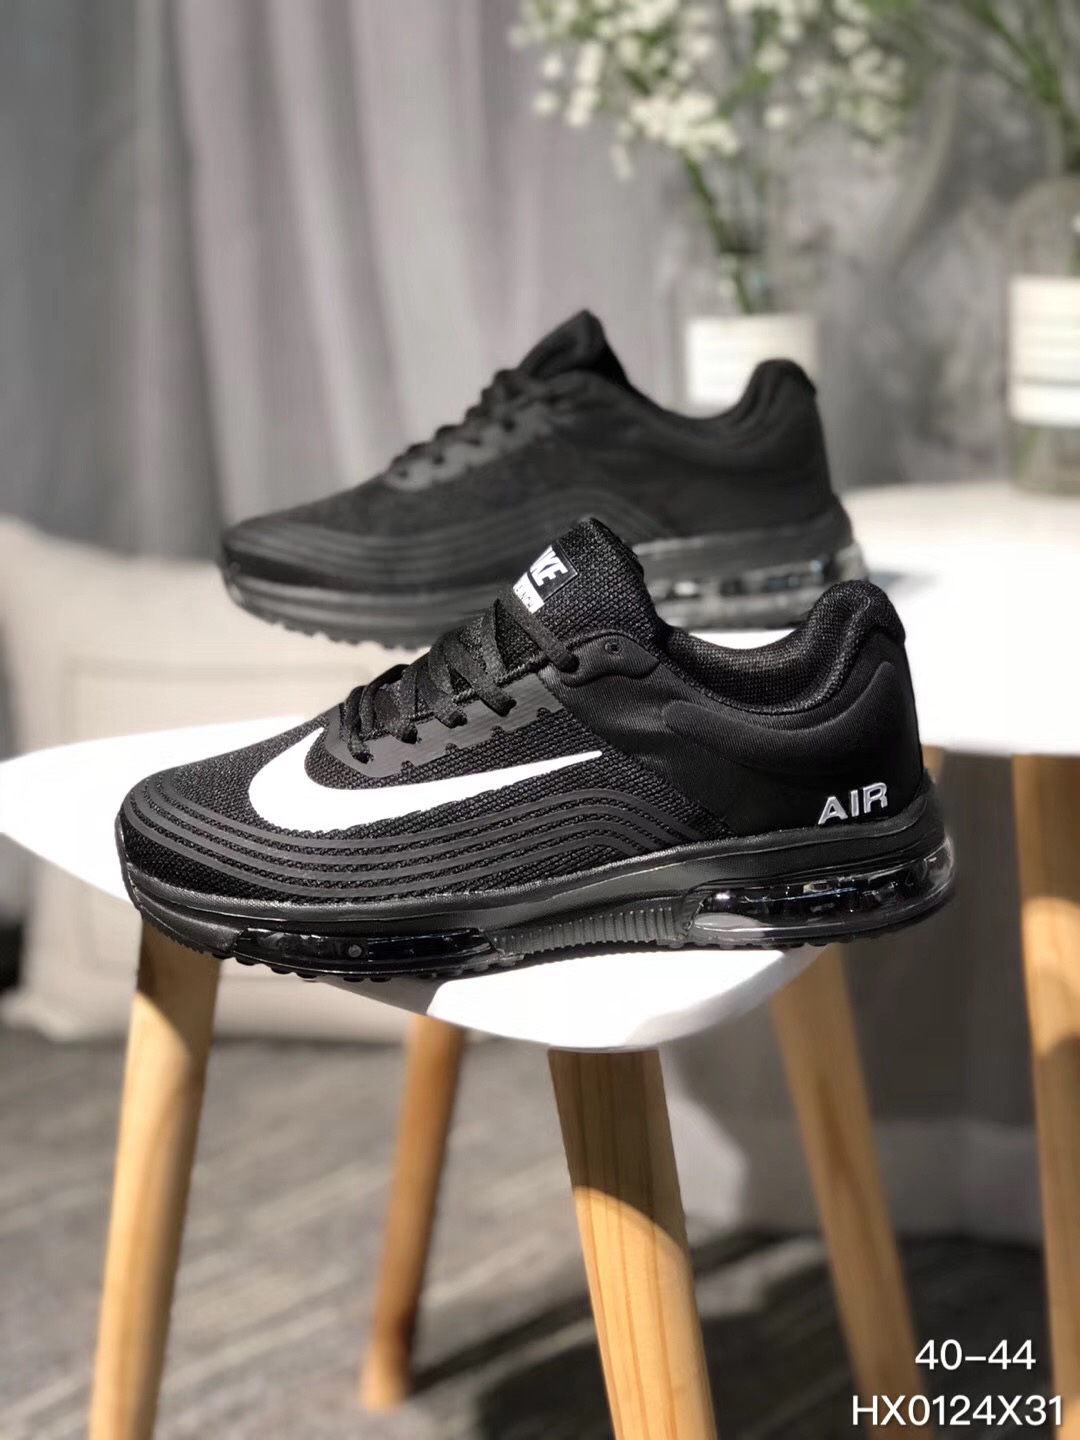 Nike Air Max 2018 Flyknit Black White Running Shoes